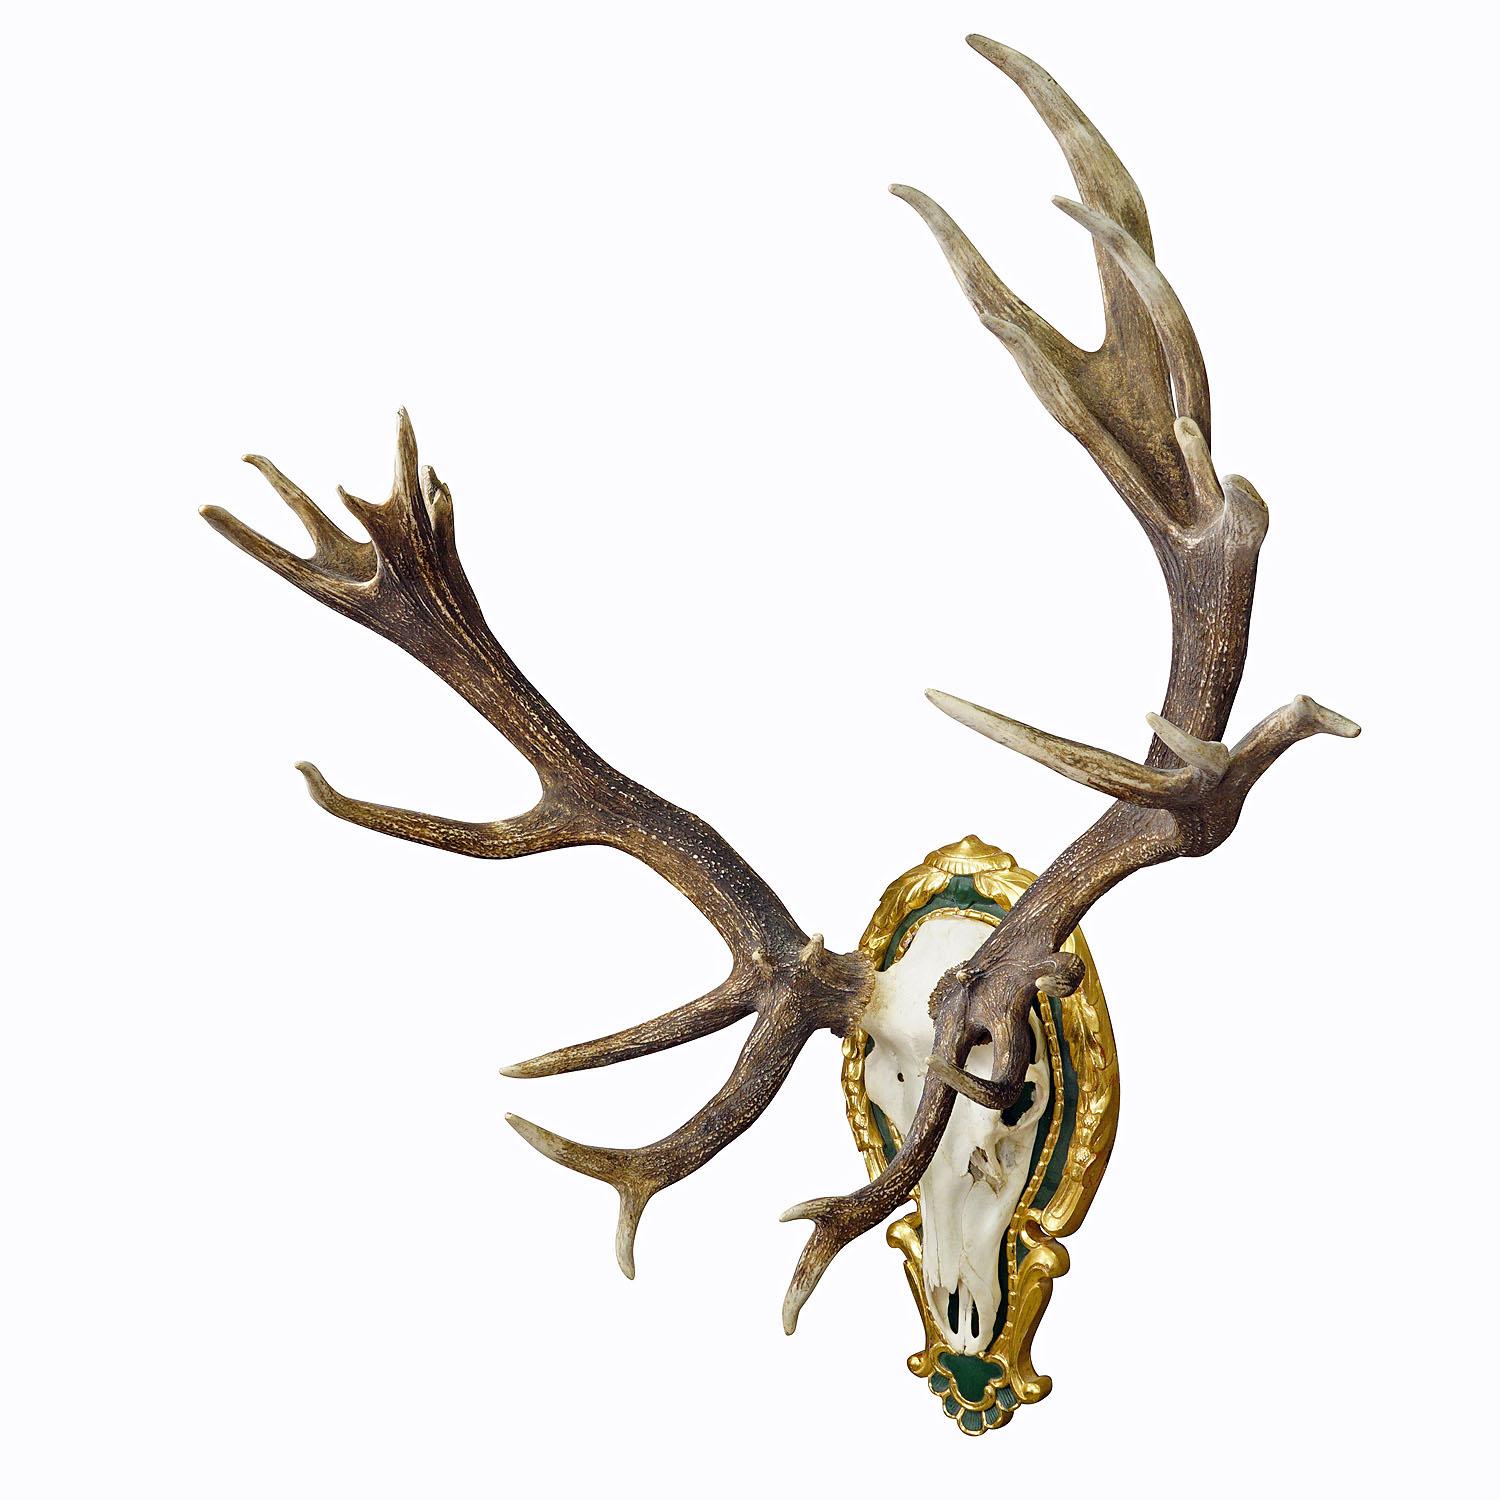 Capital Black Forest Uneven 32 Pointer Deer Trophy on Wooden Plaque

A massive uneven 32 pointer deer (Cervus elaphus) trophy from the Black Forest. The trophy was shot around 1950s. The large antlers are mounted on a carved, painted and gilded